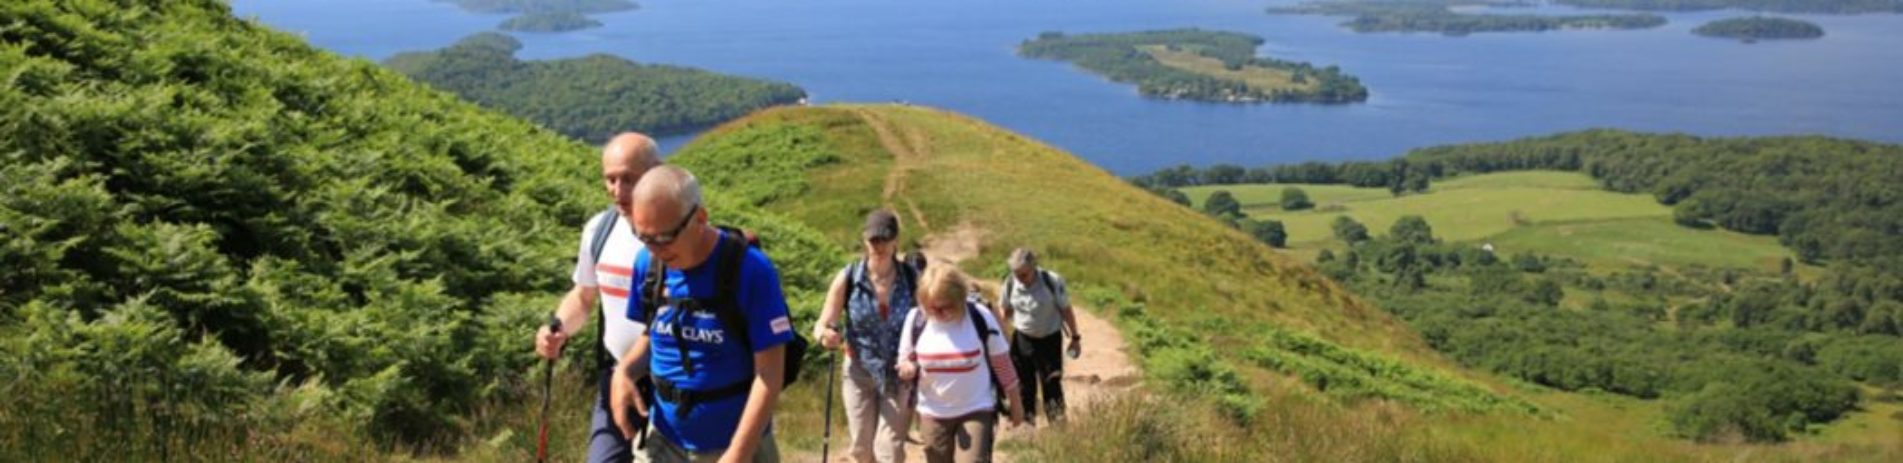 deaf-blind-walk-up-conic-hill-with-national-park-rangers